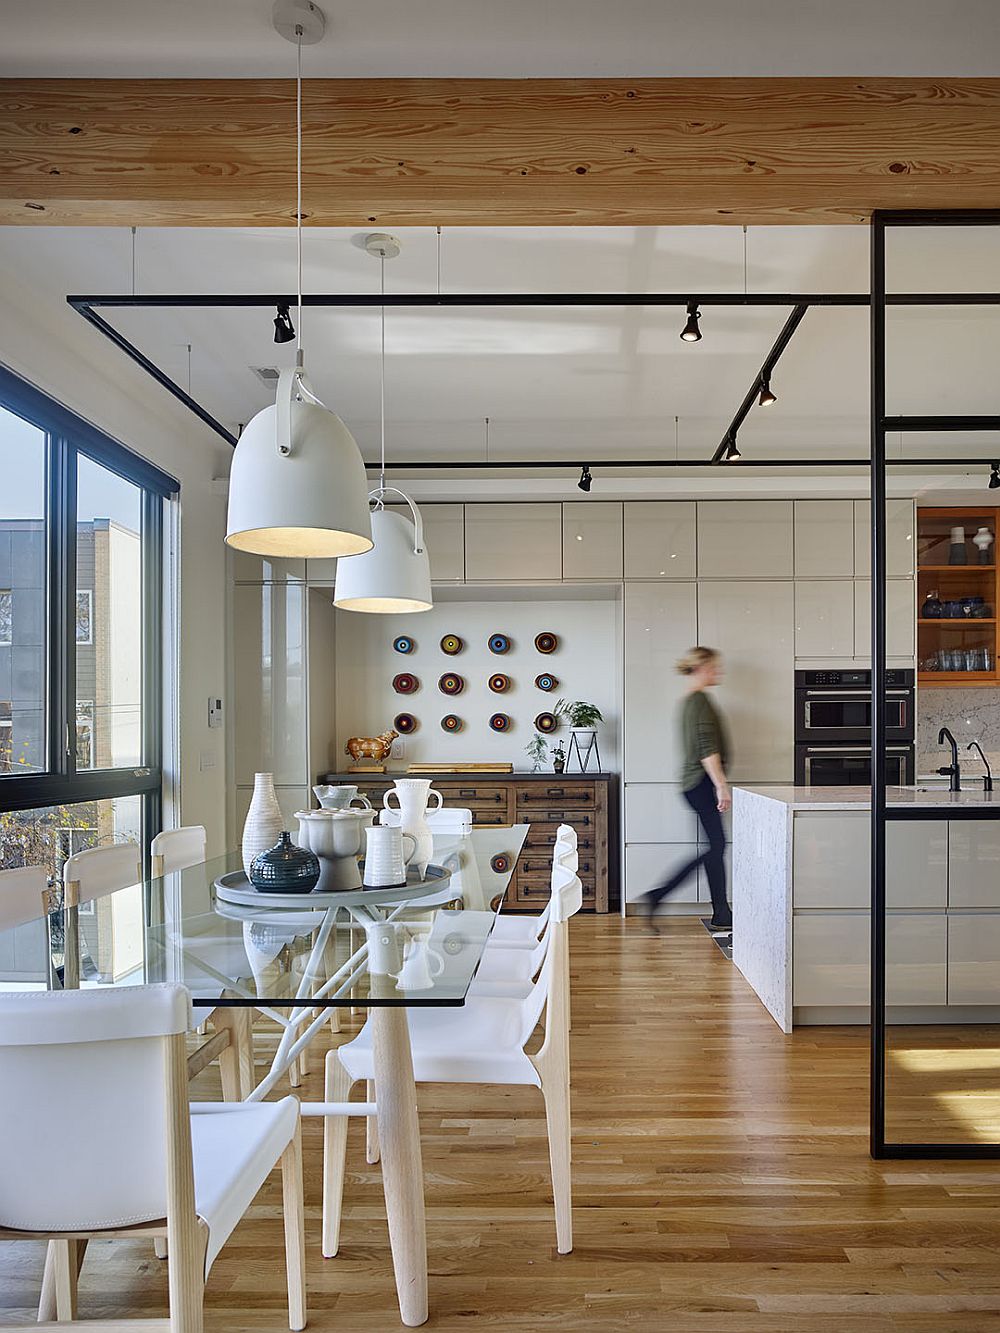 Kitchen-and-dining-area-on-the-second-floor-of-the-house